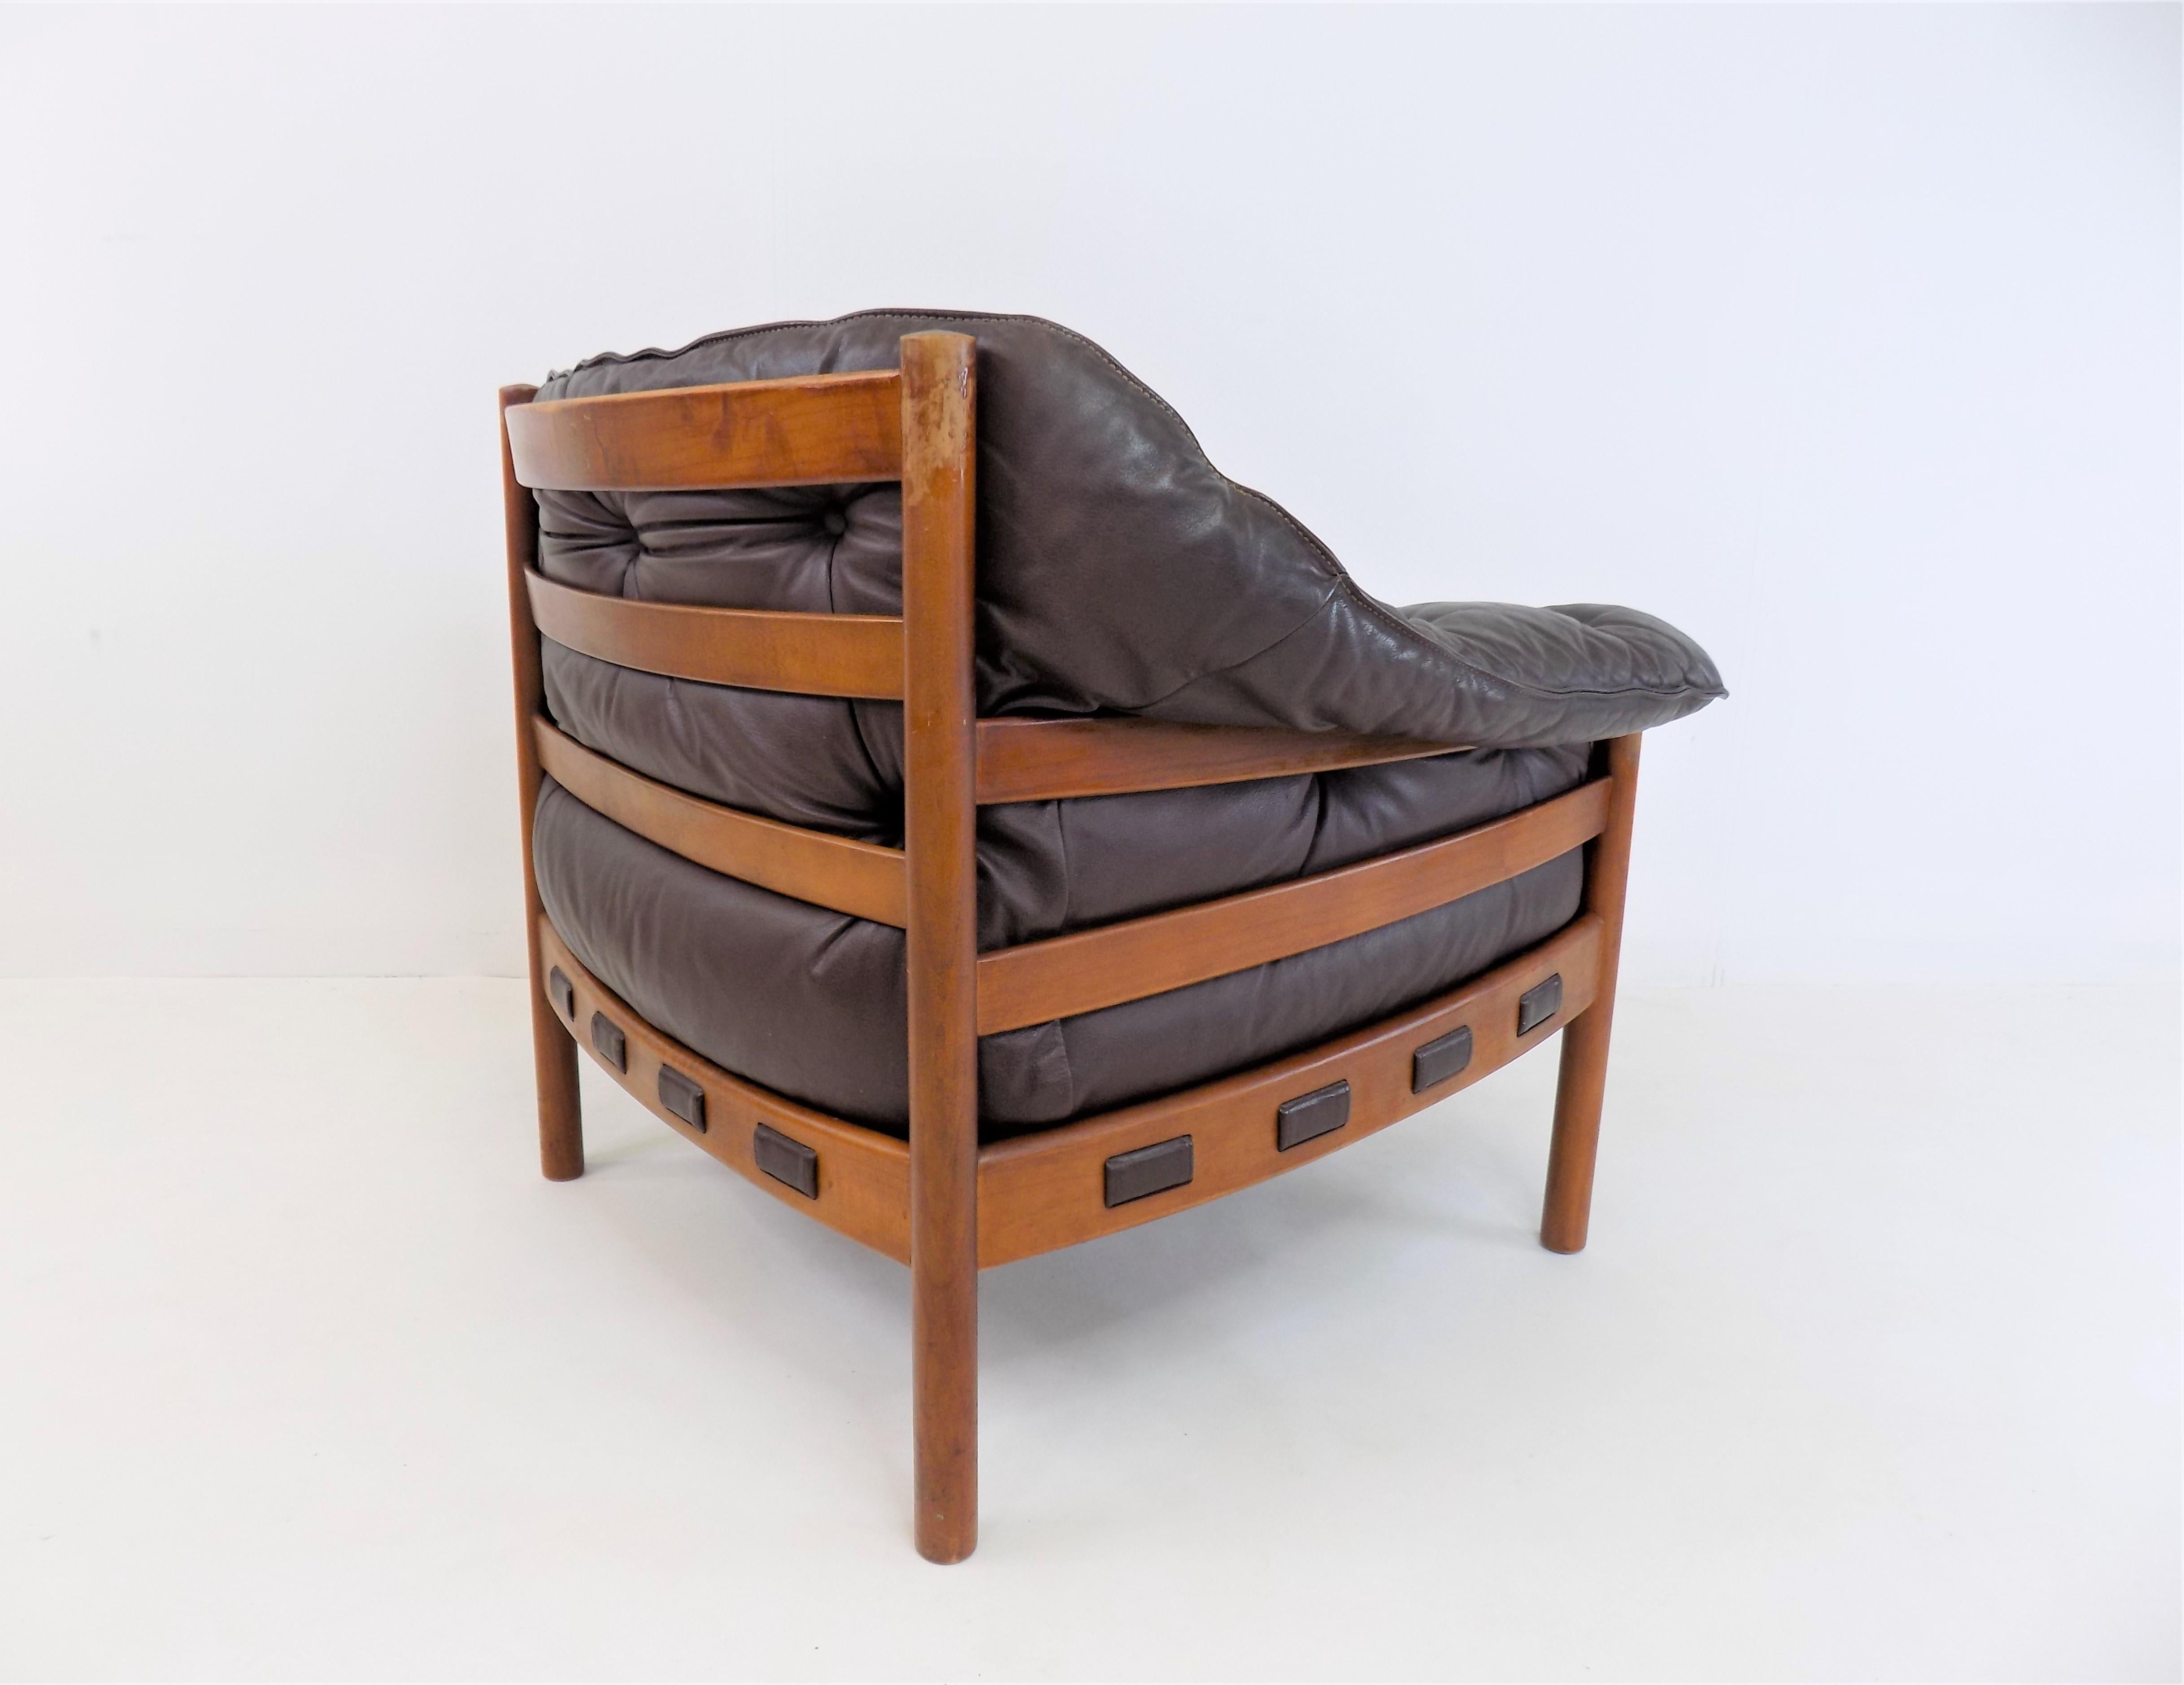 The easy chair from the 1960s, designed by Sven Ellekaer for Coja, is in very good condition. The chocolate brown leather is flawless and soft with no major signs of wear. The wooden frame shows slight signs of wear on the corner posts. The